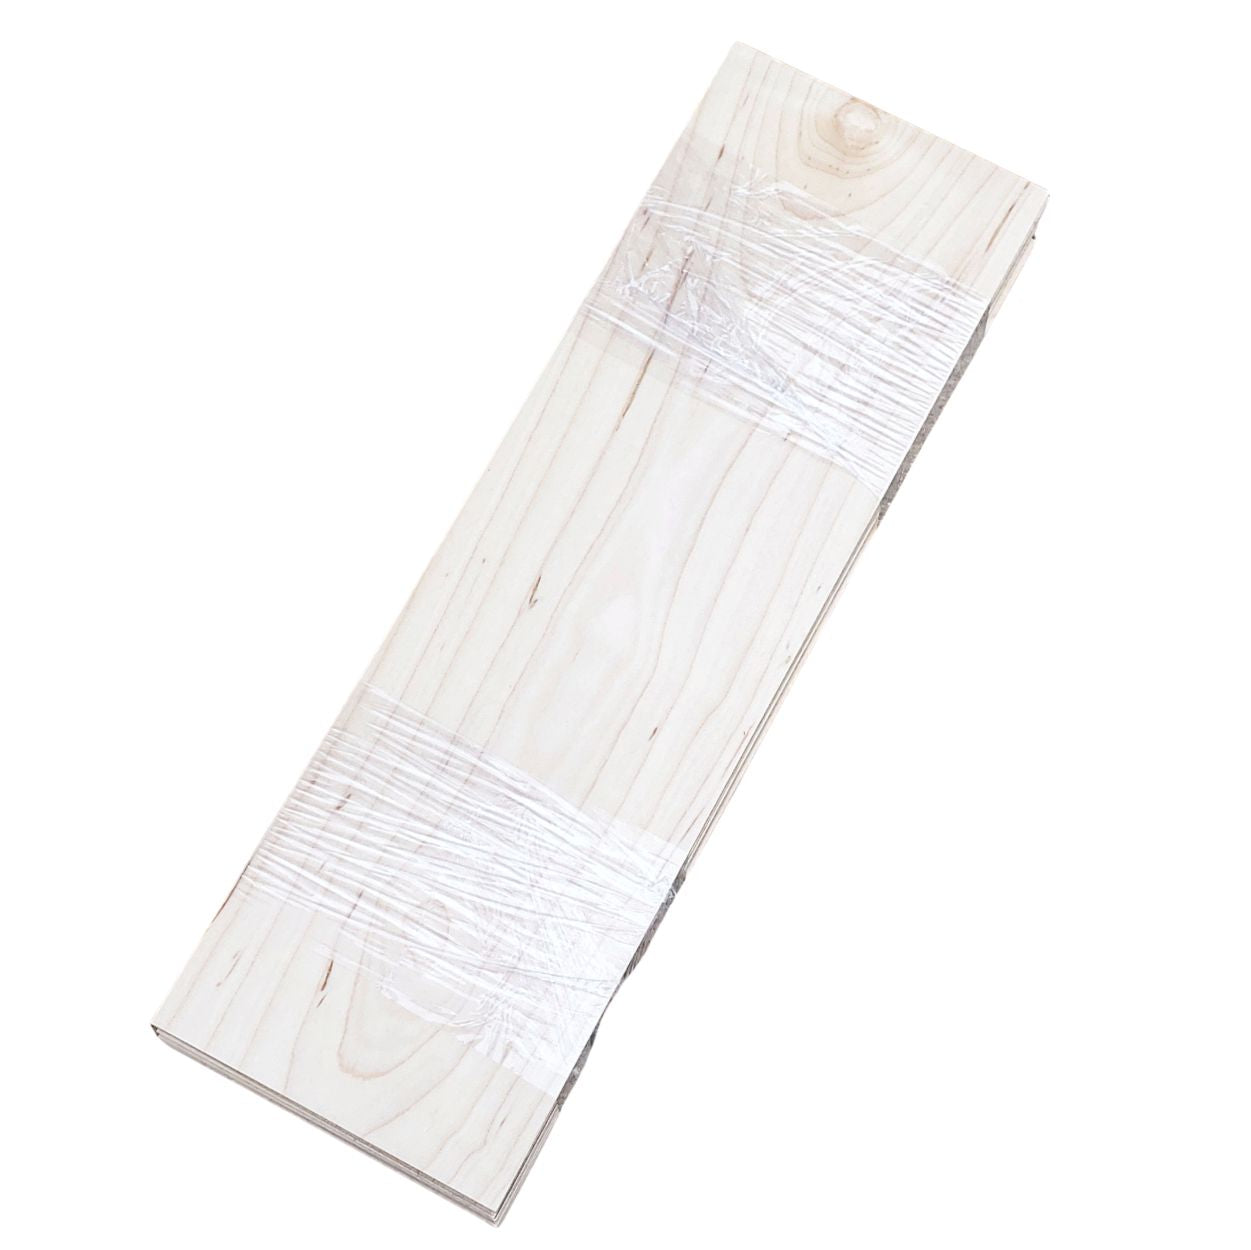 Maple Wood Strips for Laser Engraving - 4.5 x 14 x 1/8" Pack of 10